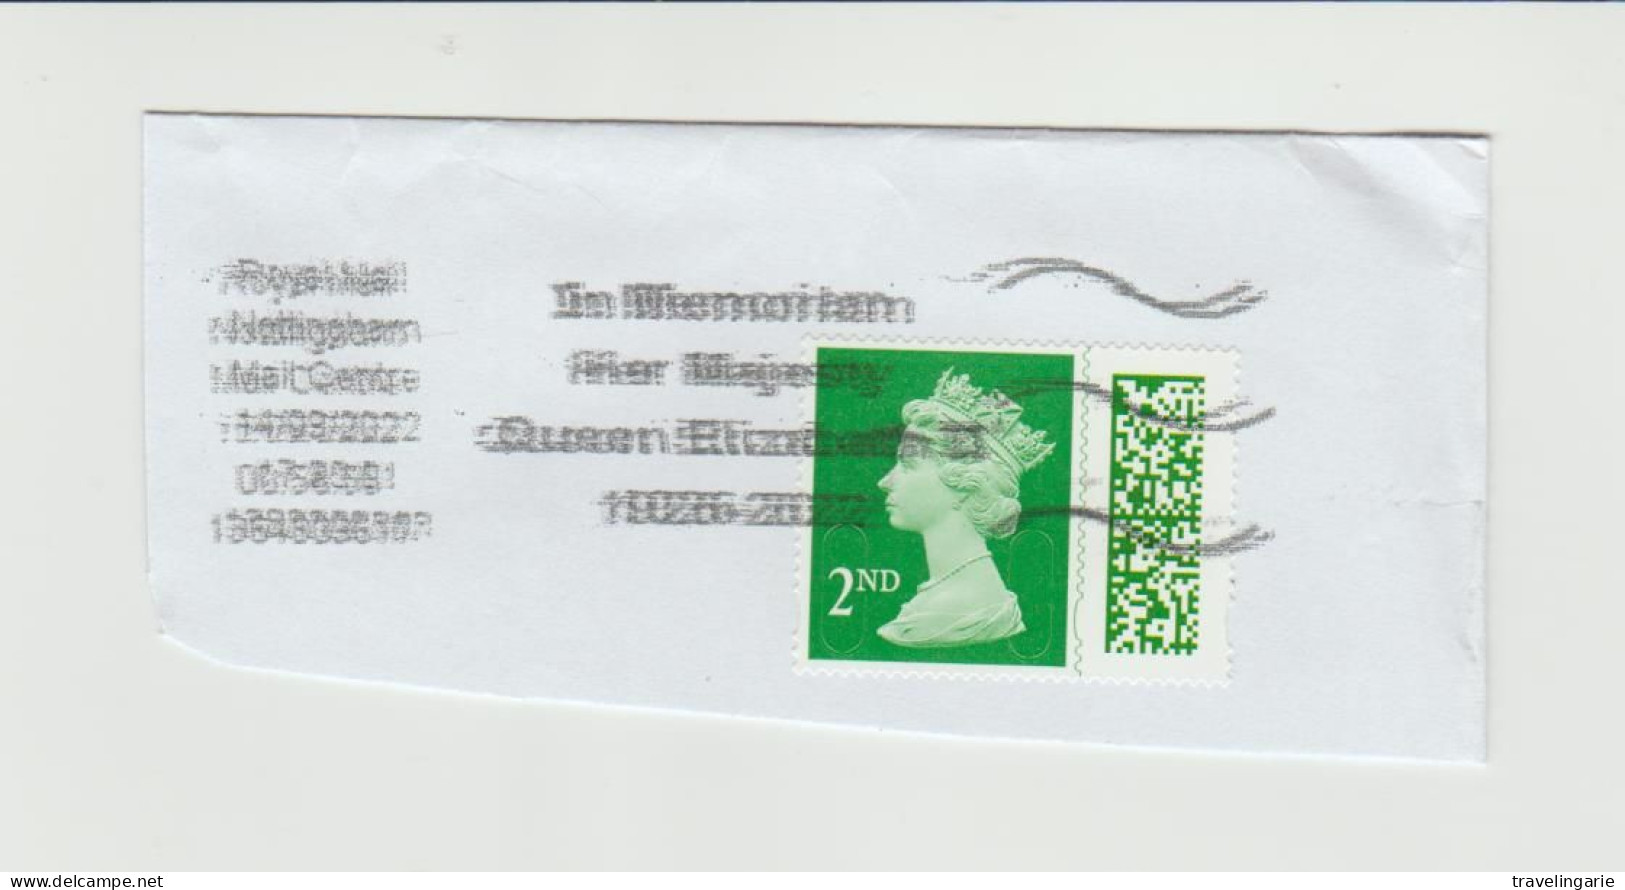 United Kingdom 2022 2nd Class With Barcode And ''In Memoriam Her Majesty Queen Elizabeth 1926-2022¨ Tied On Piece - Royalties, Royals